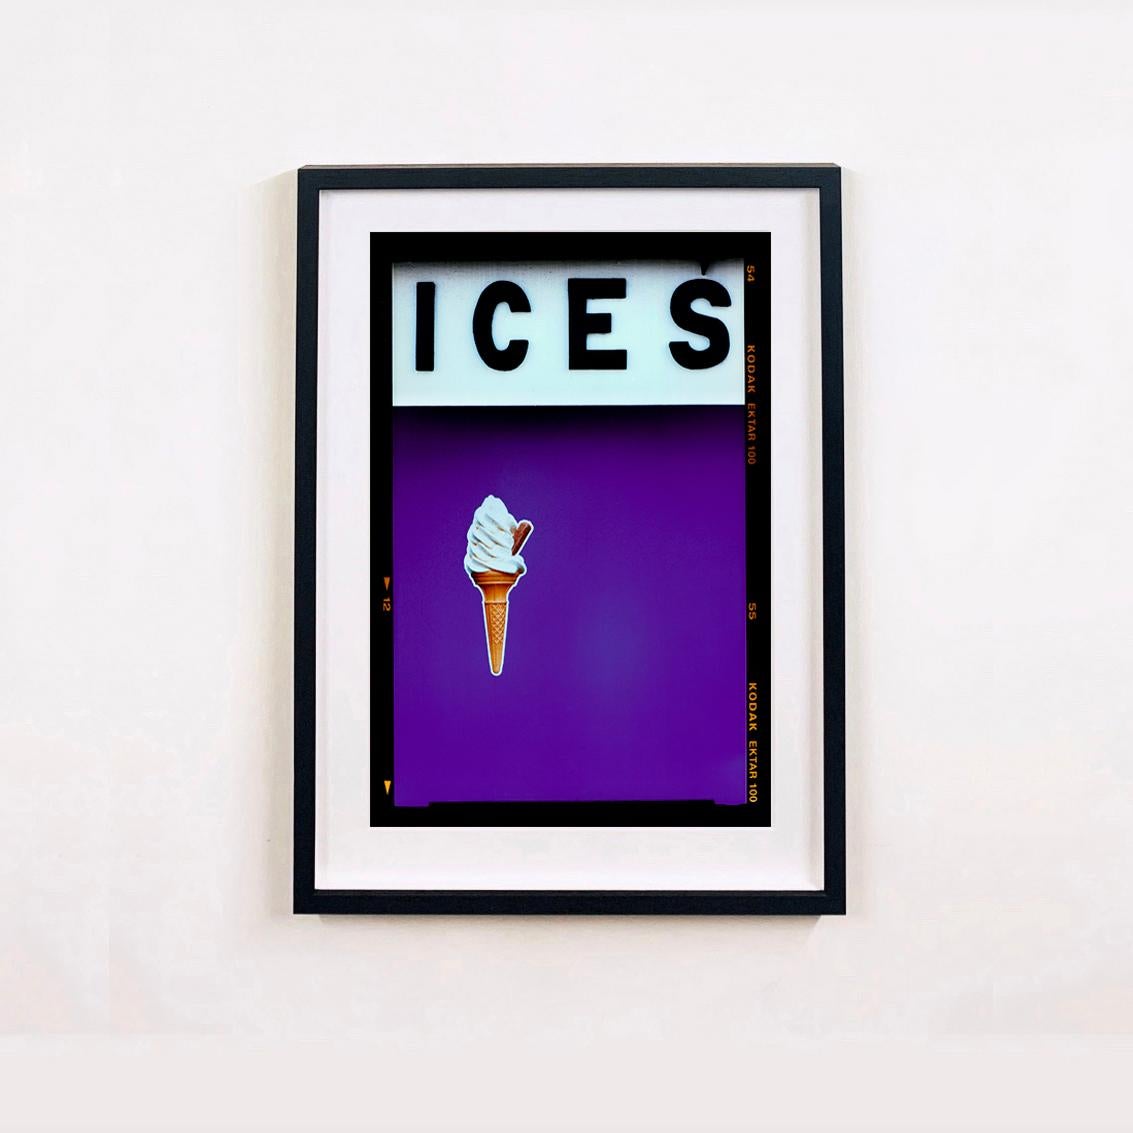 Ices (Purple), Bexhill-on-Sea - British seaside color photography - Photograph by Richard Heeps